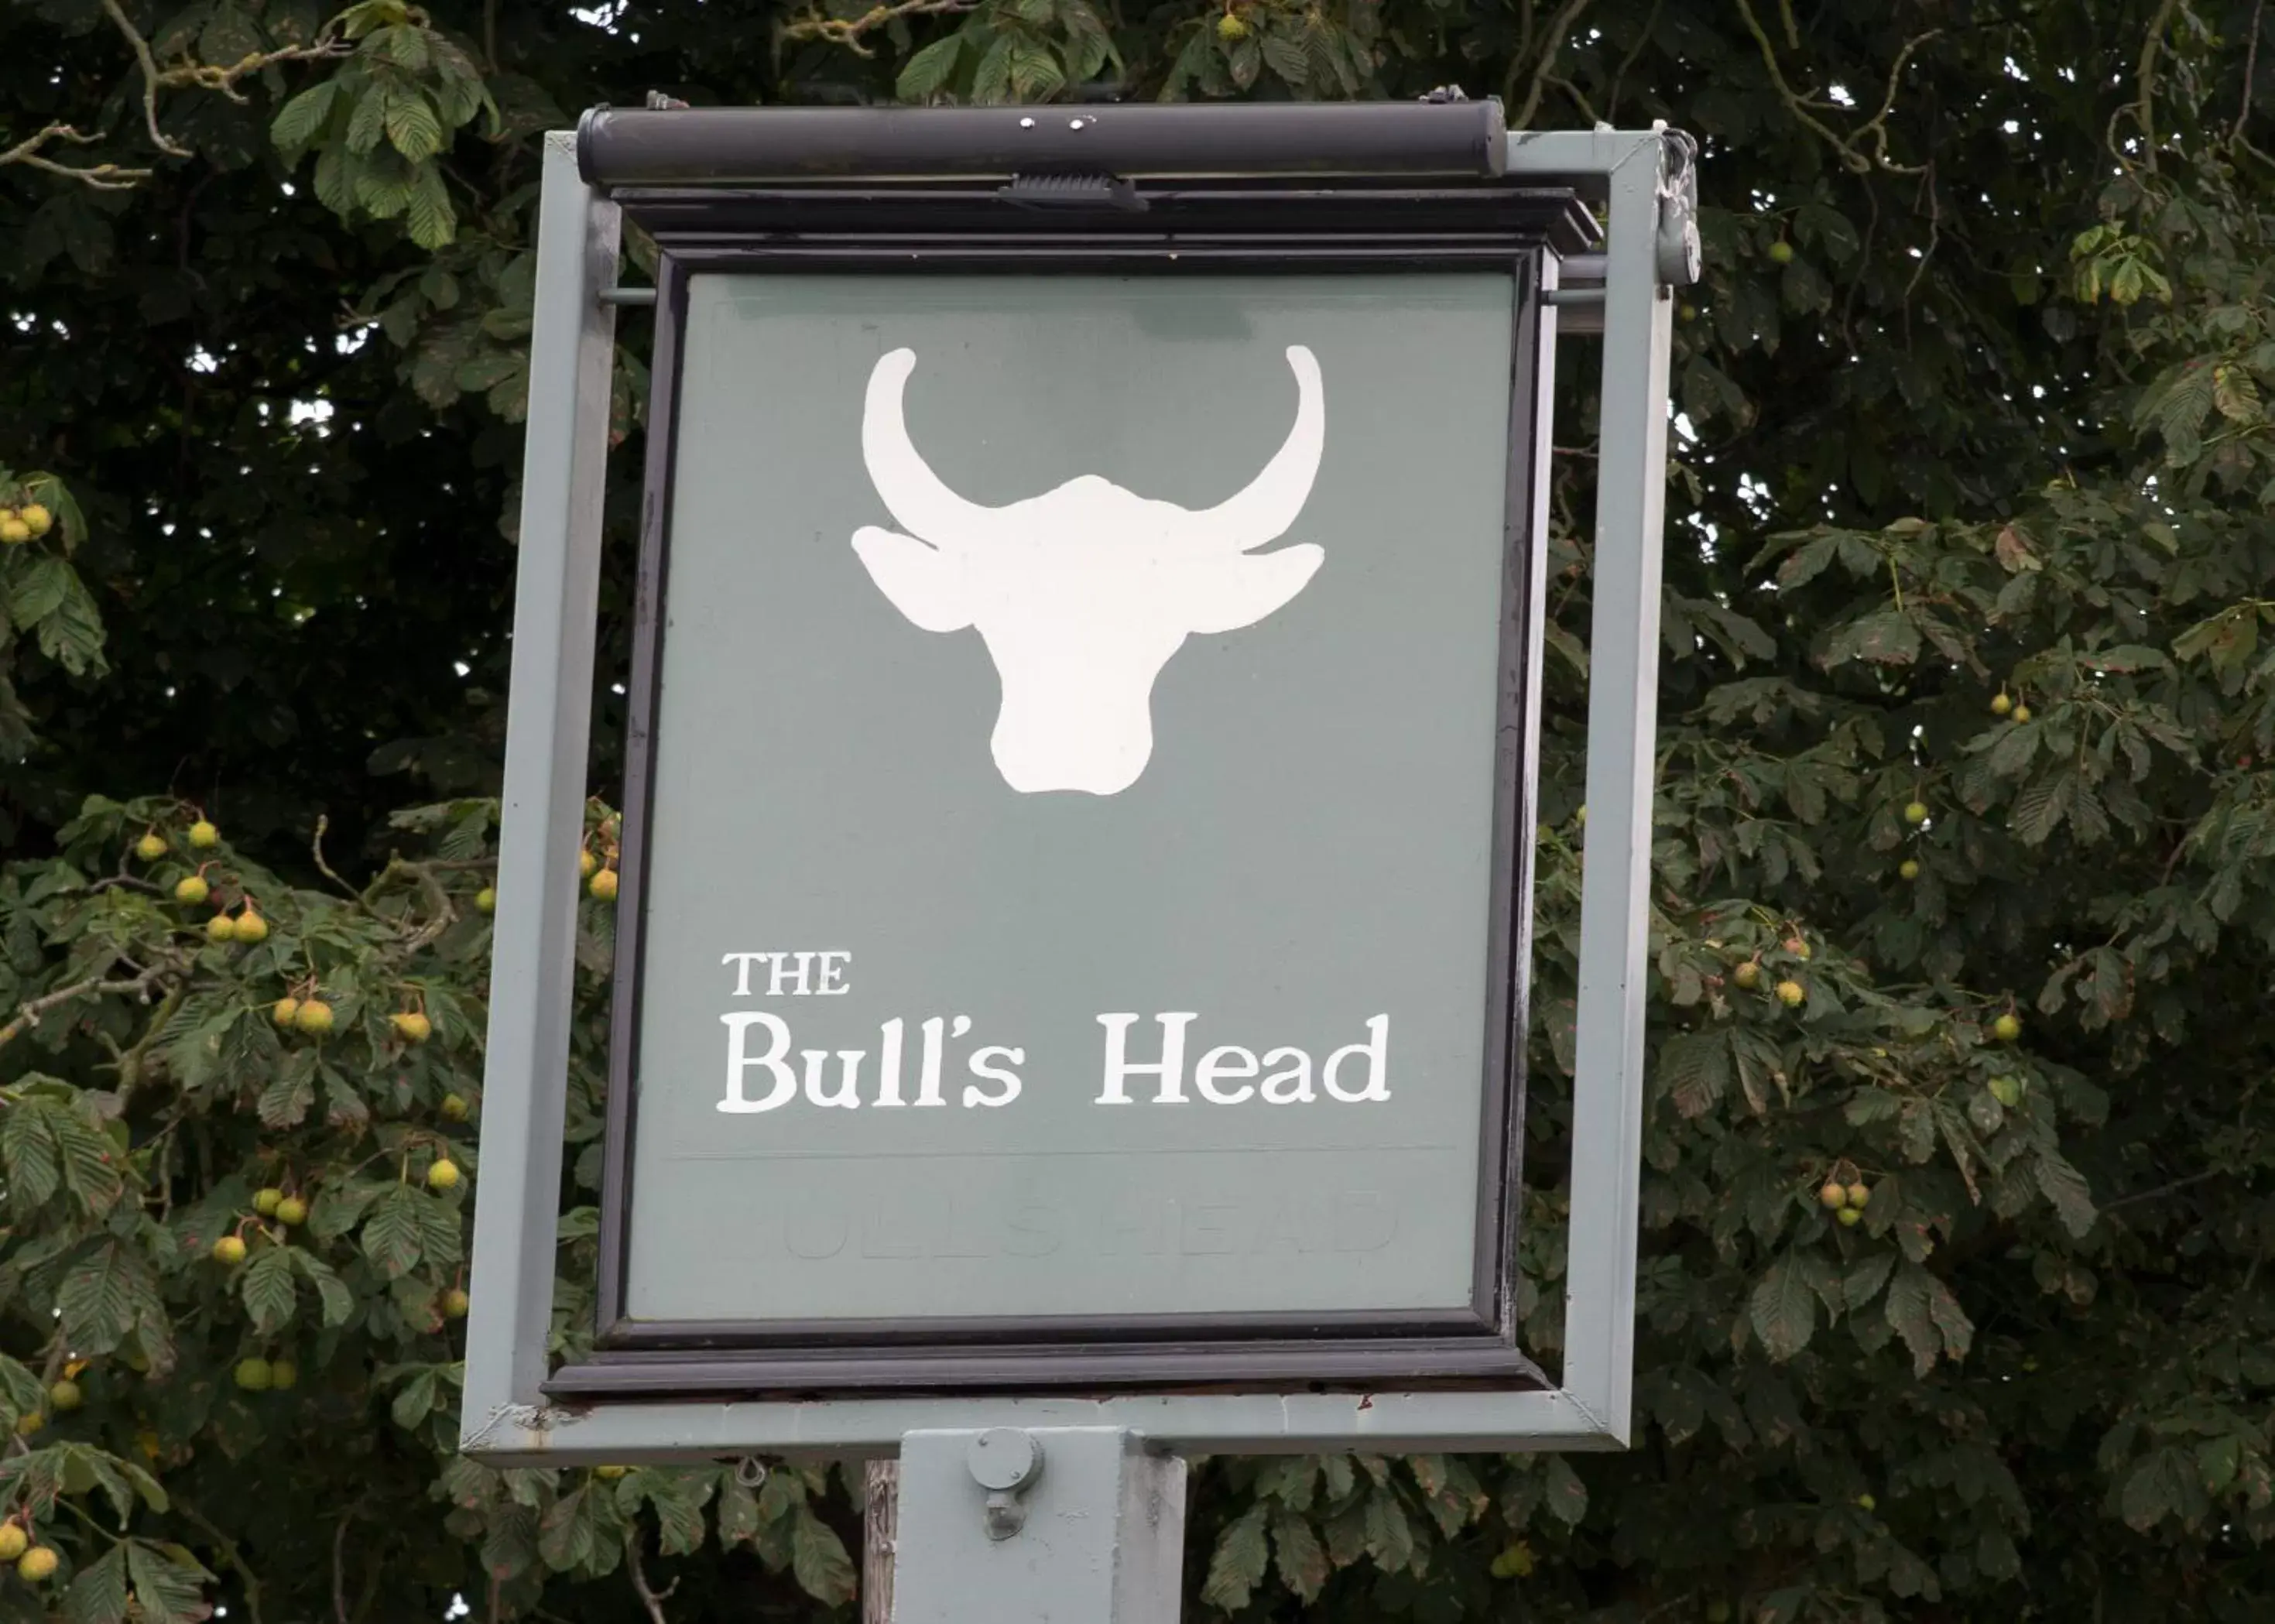 Property logo or sign, Property Logo/Sign in The Bulls Head